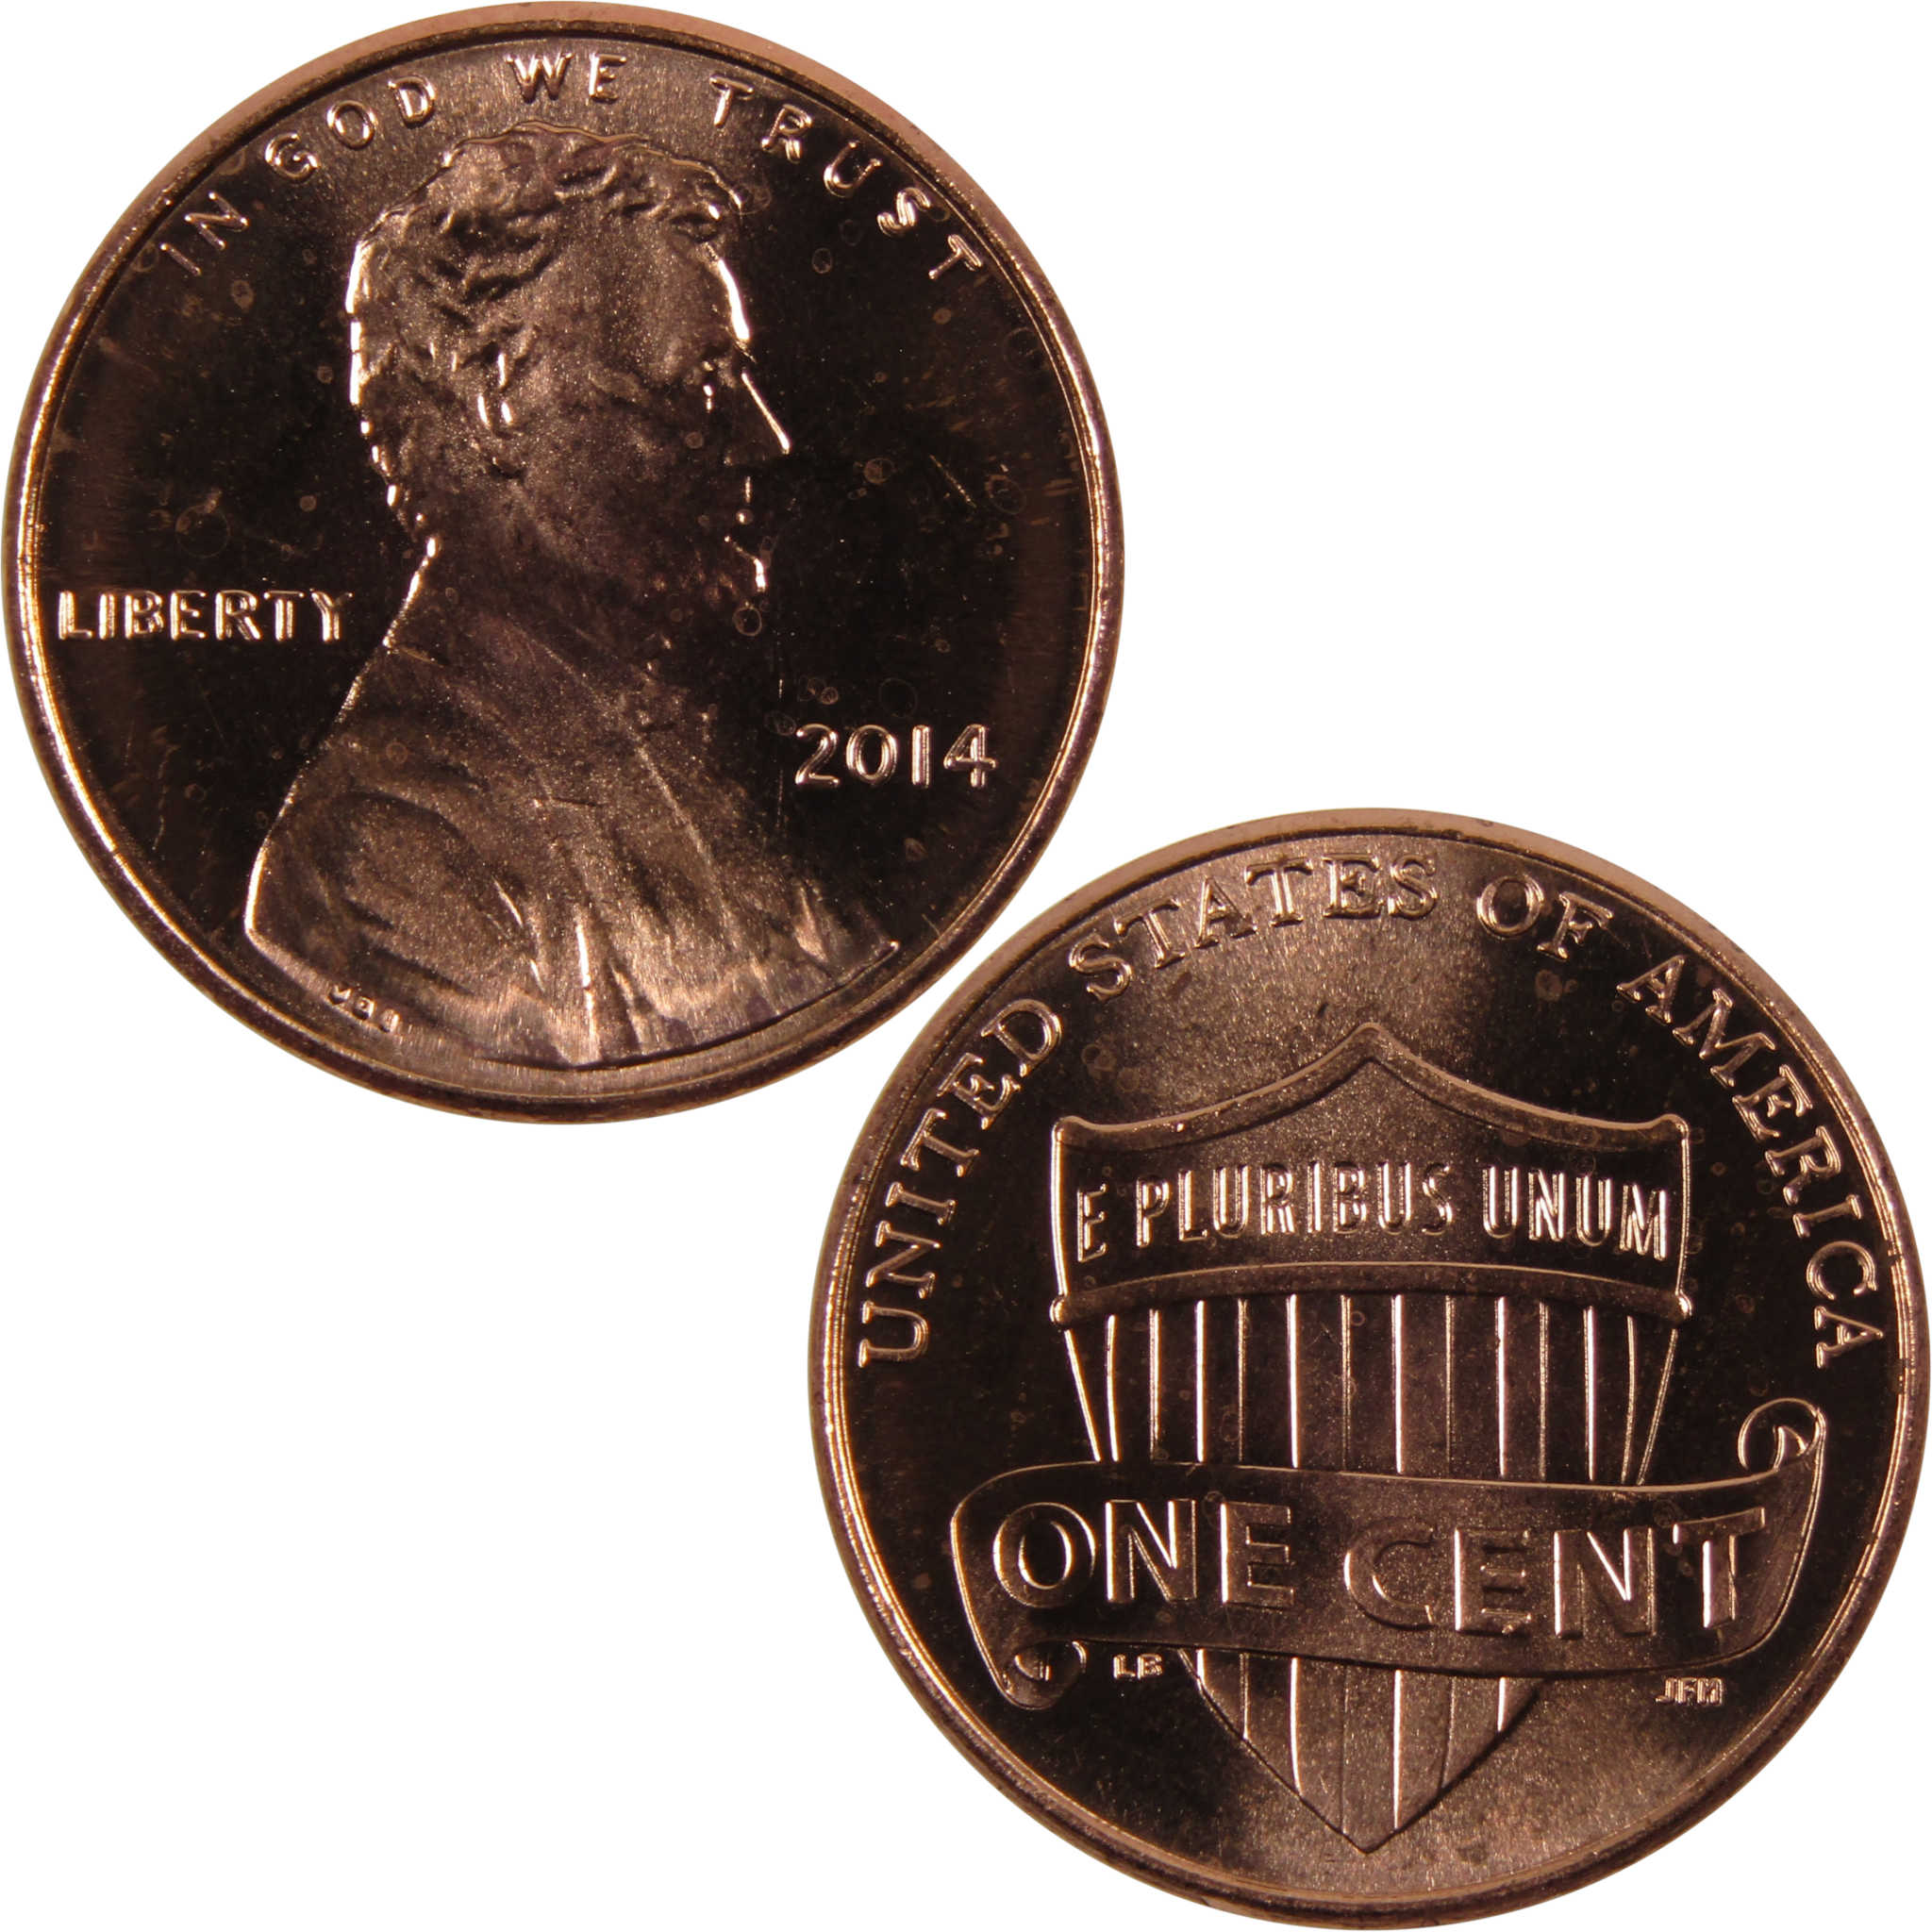 2014 Lincoln Shield Cent BU Uncirculated Penny 1c Coin